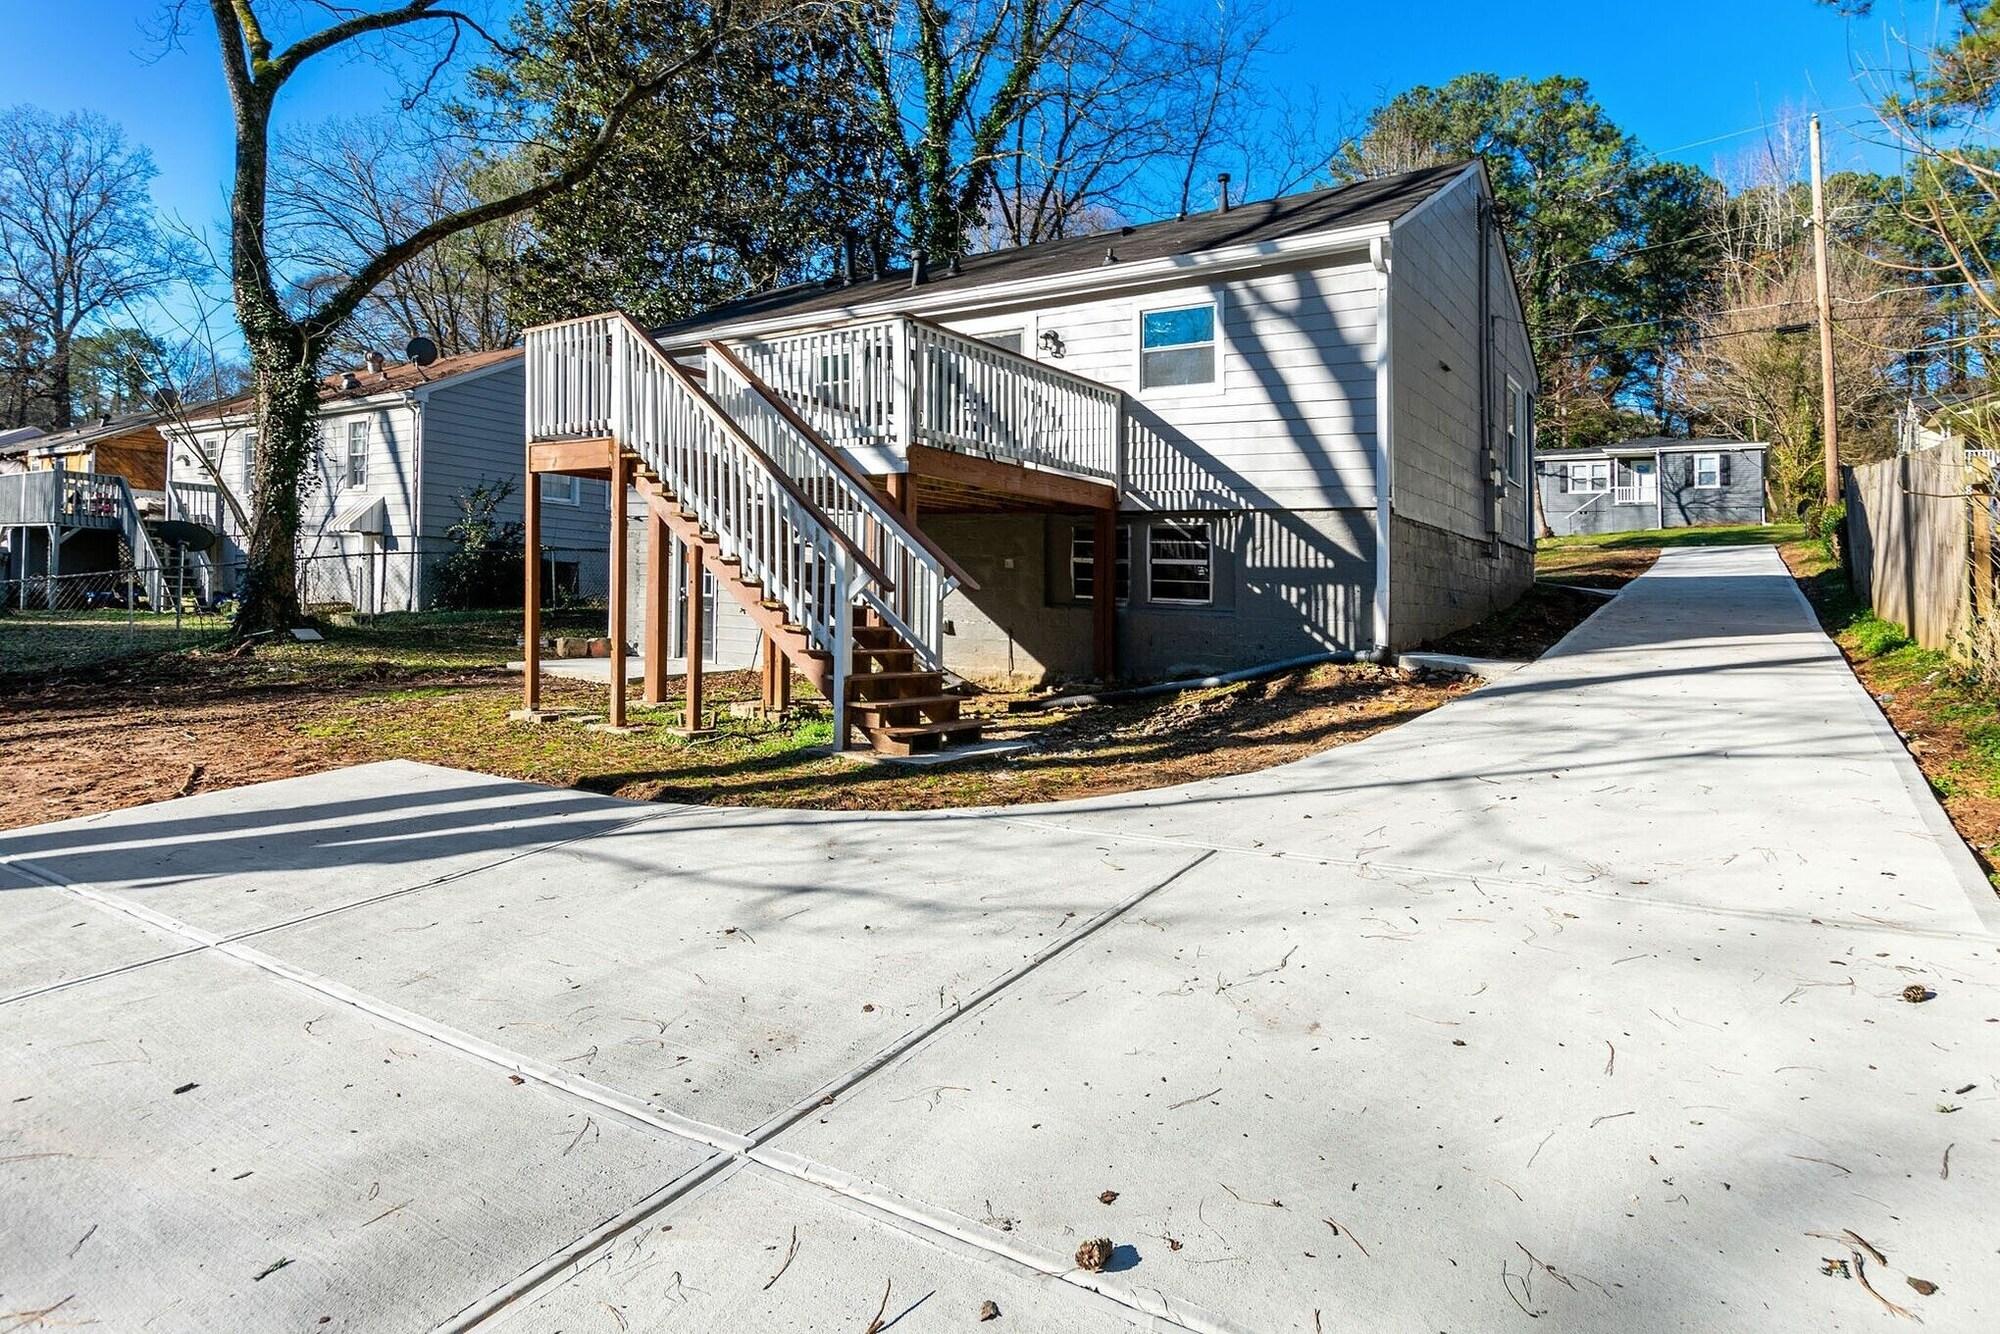 Exterior View Explore Atlanta! Enjoy All The City Has To Offer Without The Noise And Stress Of City Life! 2 Bedroom Home by Redawning